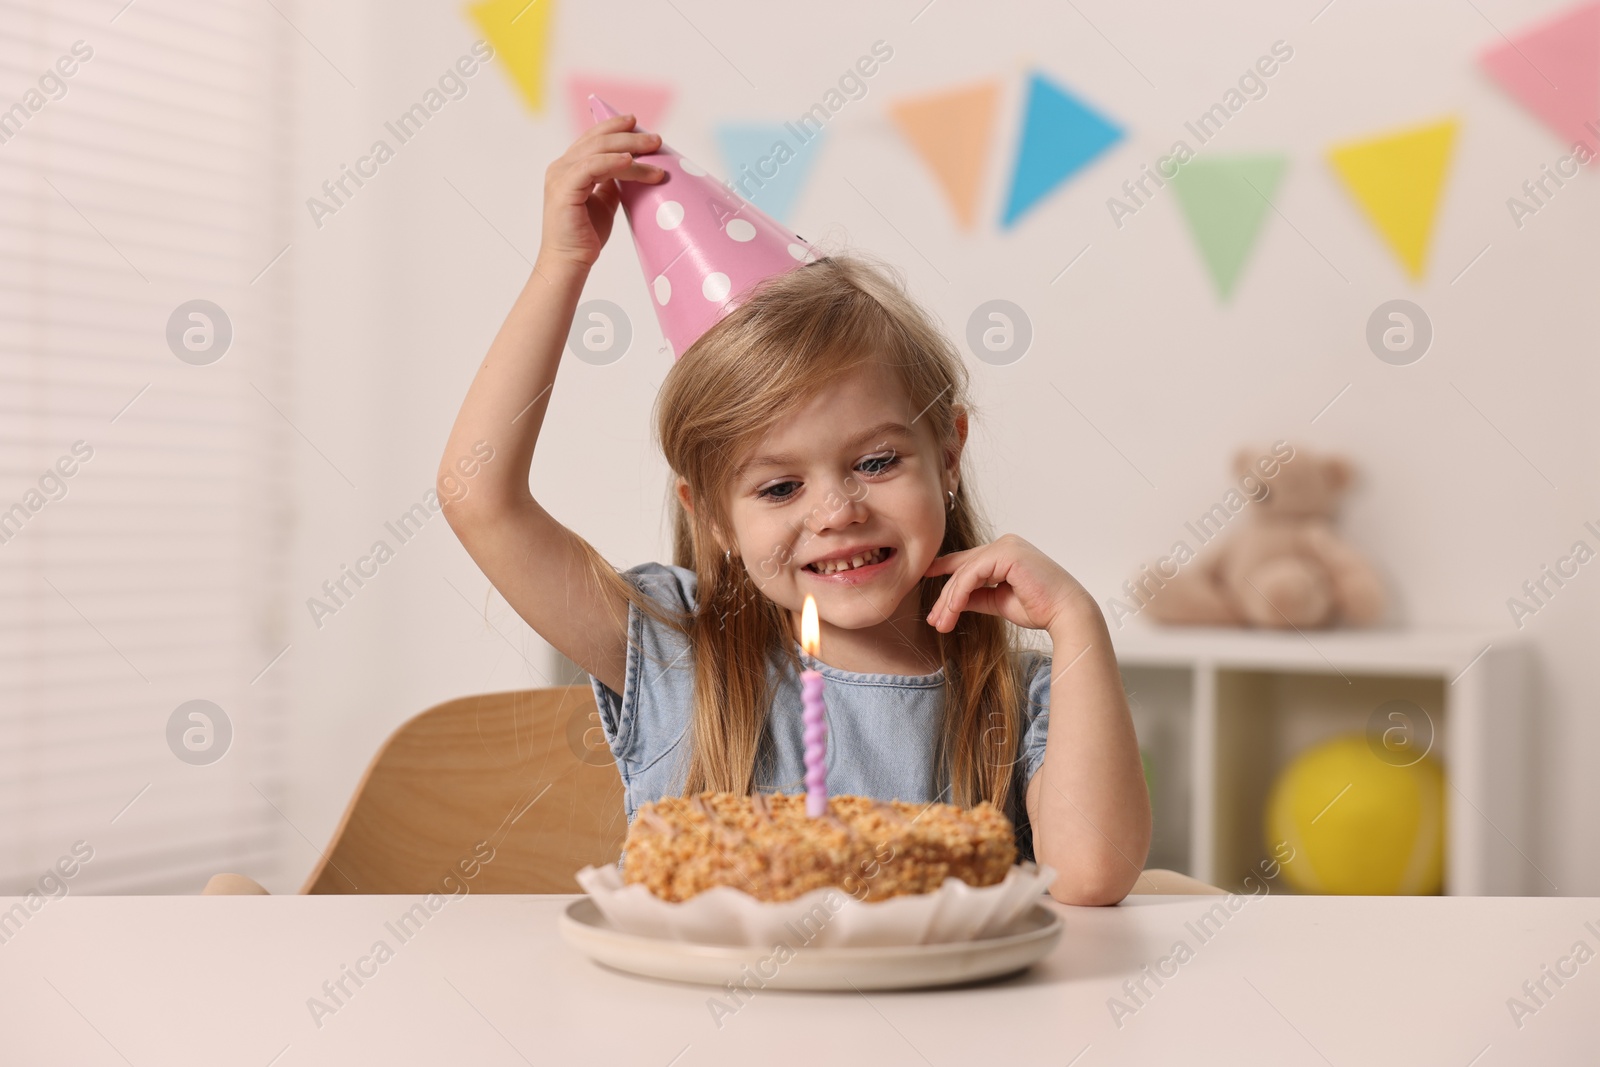 Photo of Cute girl in party hat with birthday cake at table indoors